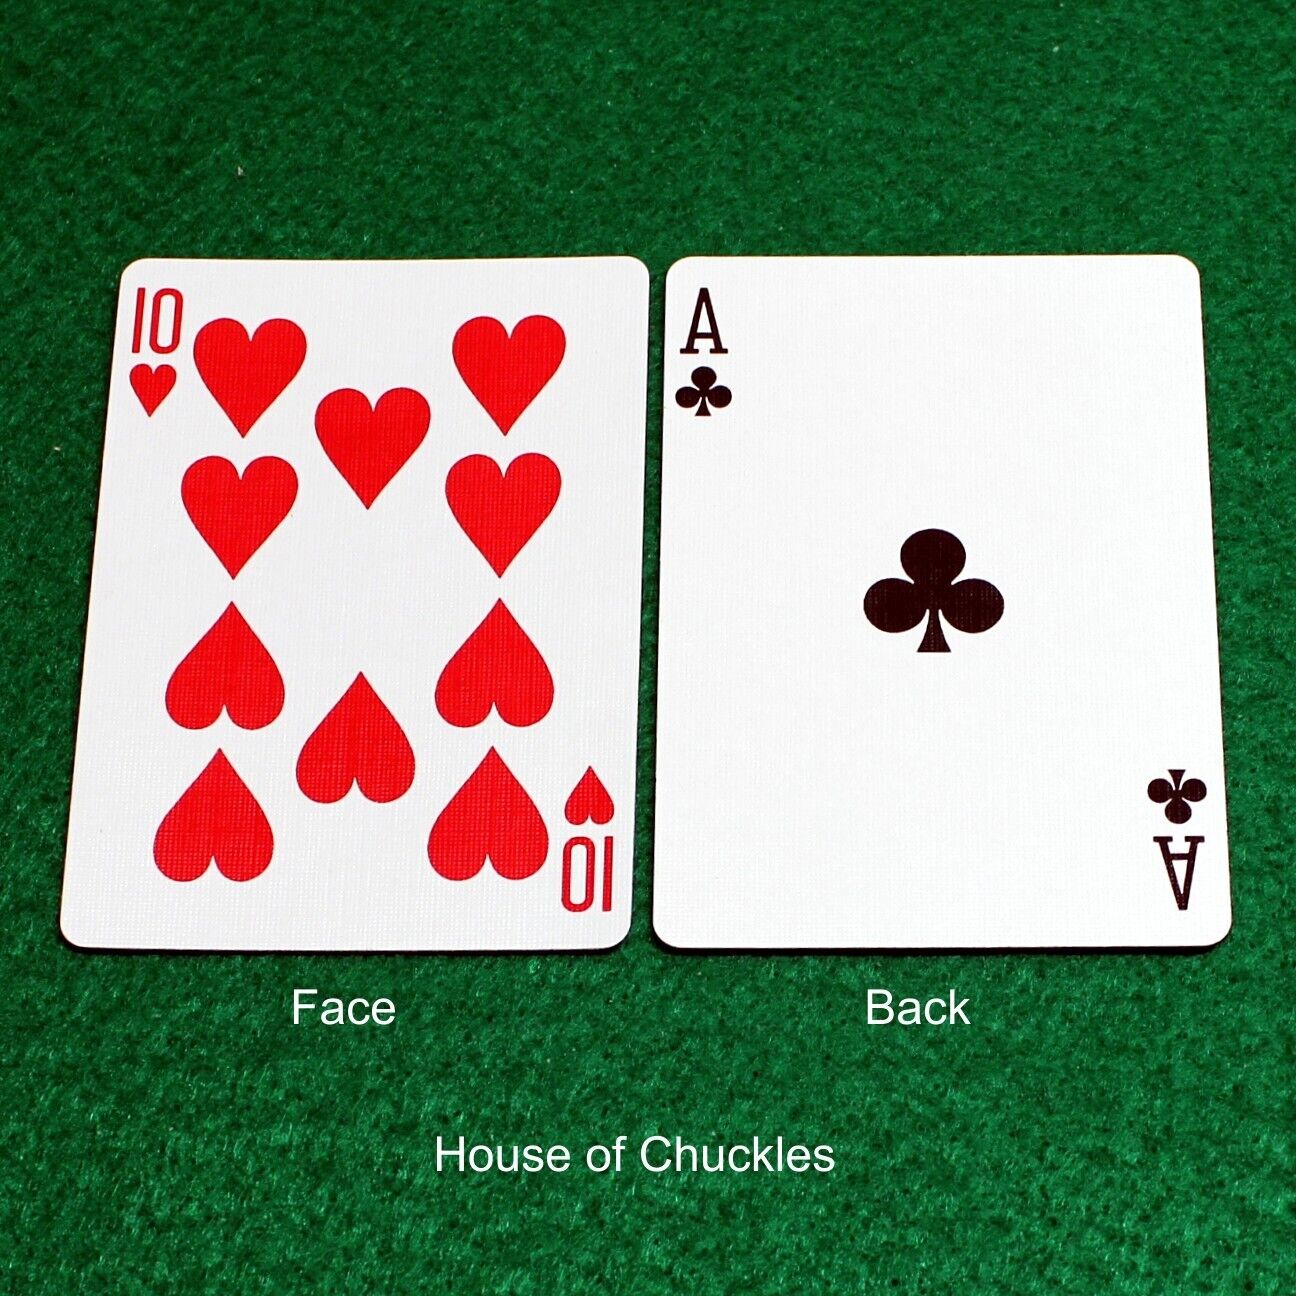 10 of Hearts / Ace of Clubs - Double Face - OFFICIAL - Bicycle Gaff Playing Card